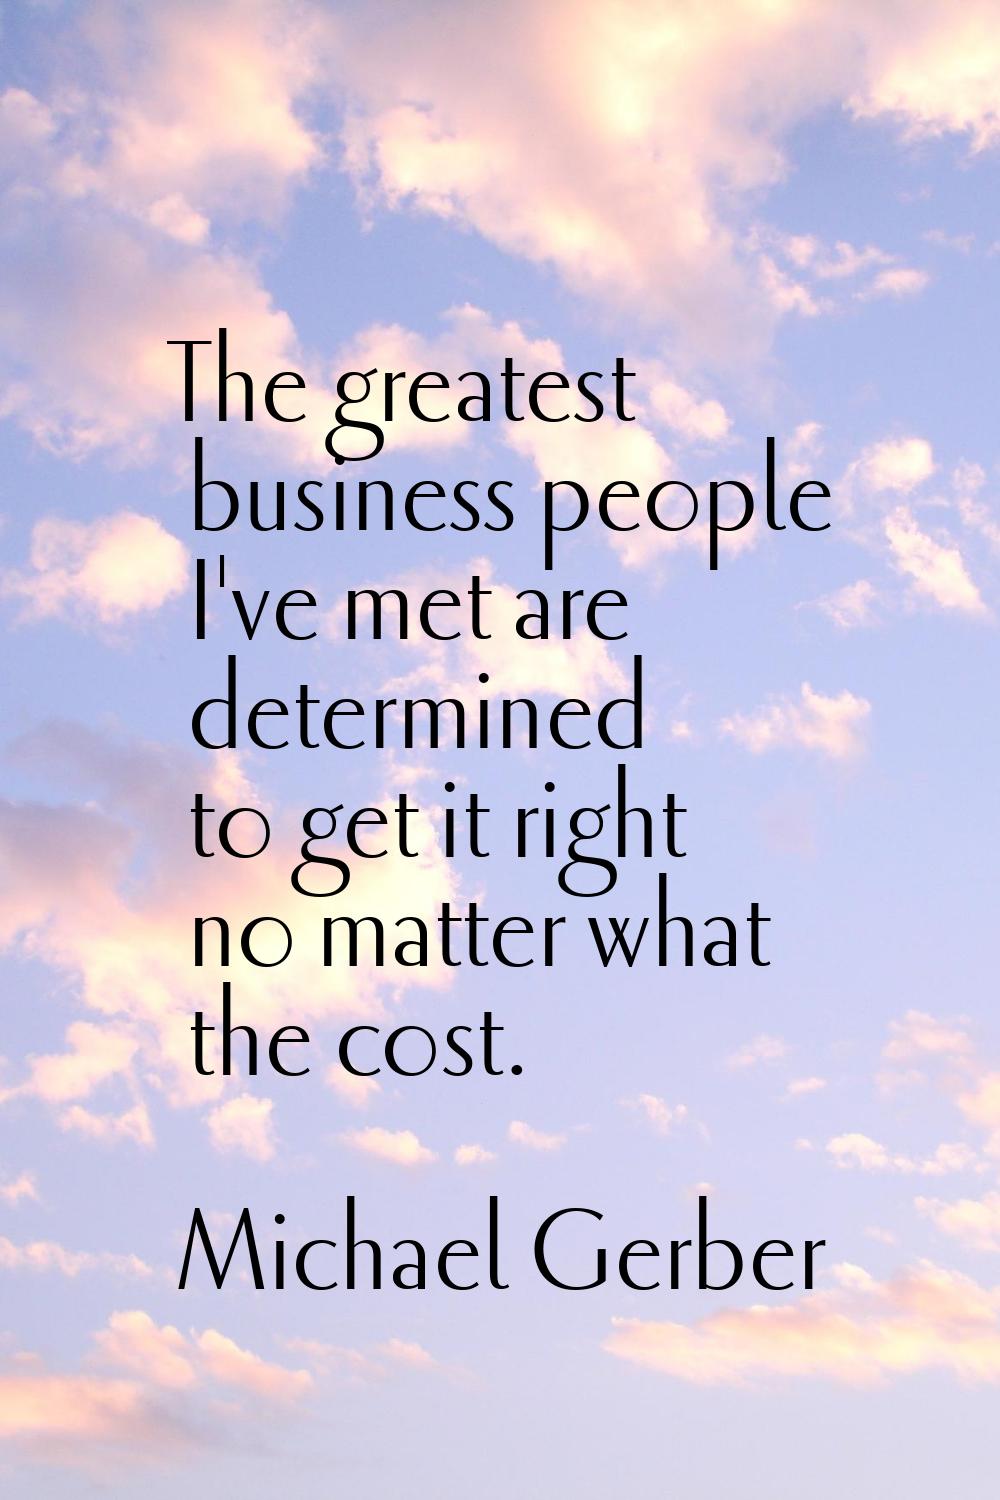 The greatest business people I've met are determined to get it right no matter what the cost.